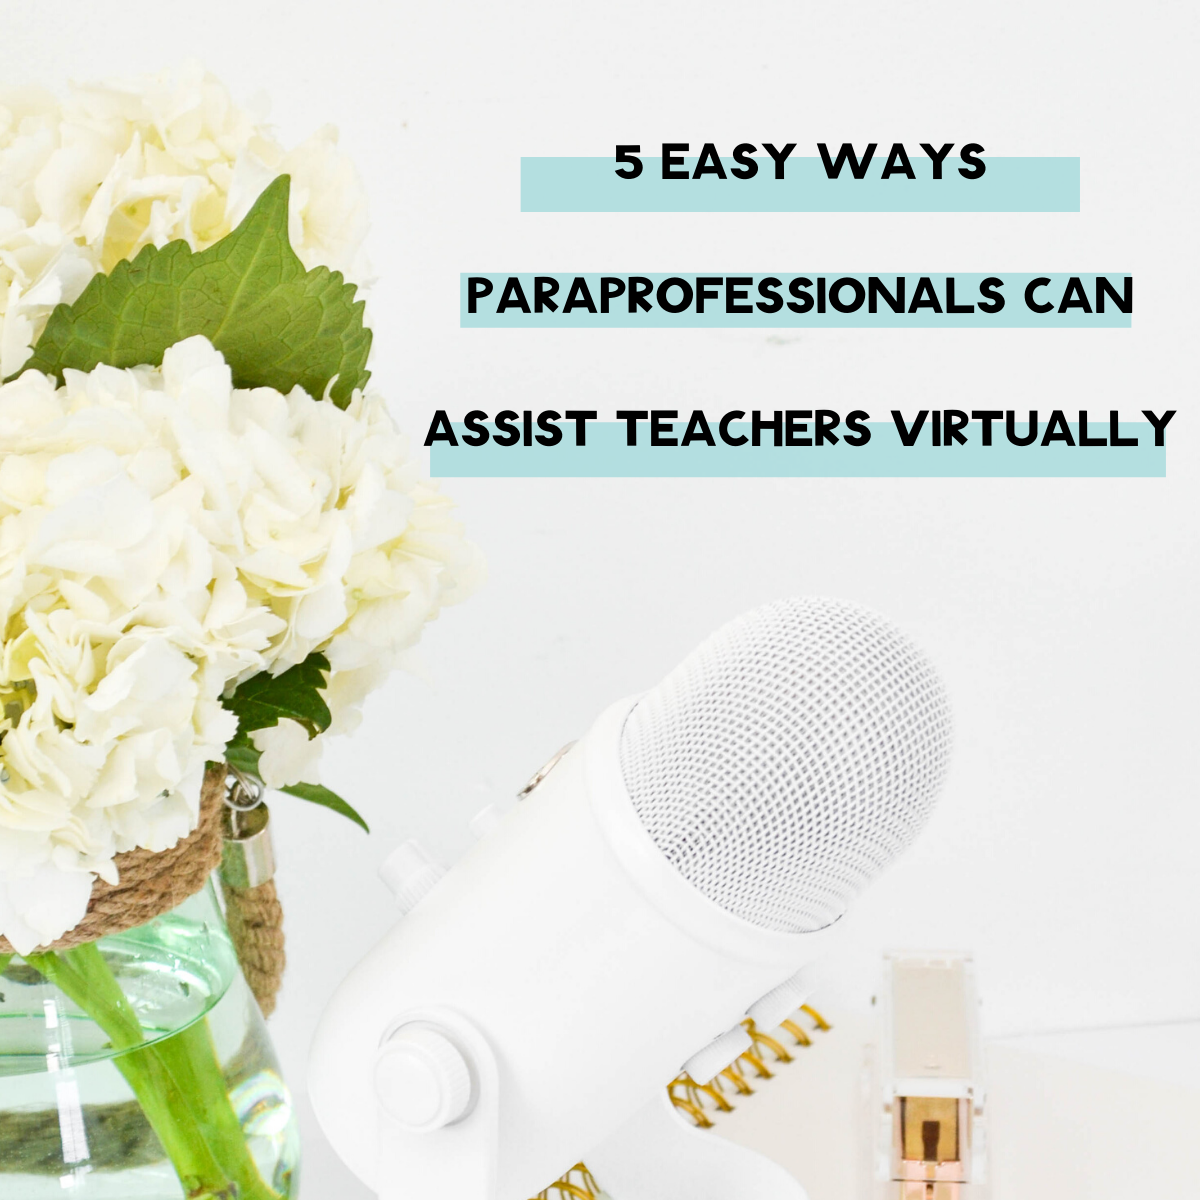 5 ways to use paraprofessionals during distance learning - cultivating exceptional minds podcast